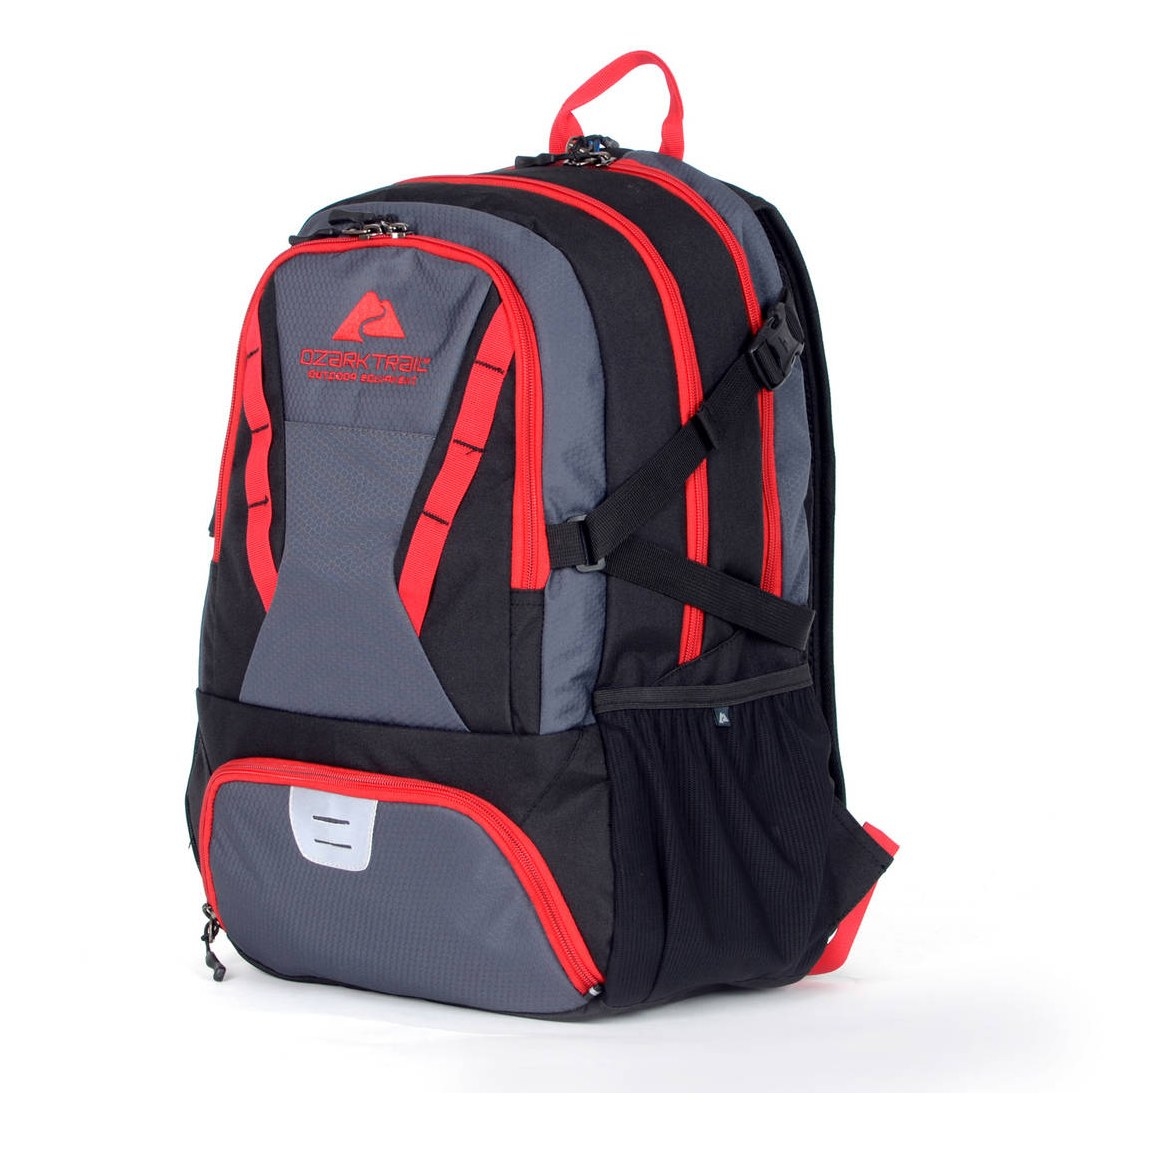 An image of a camping daypack with an insulated cooler inside